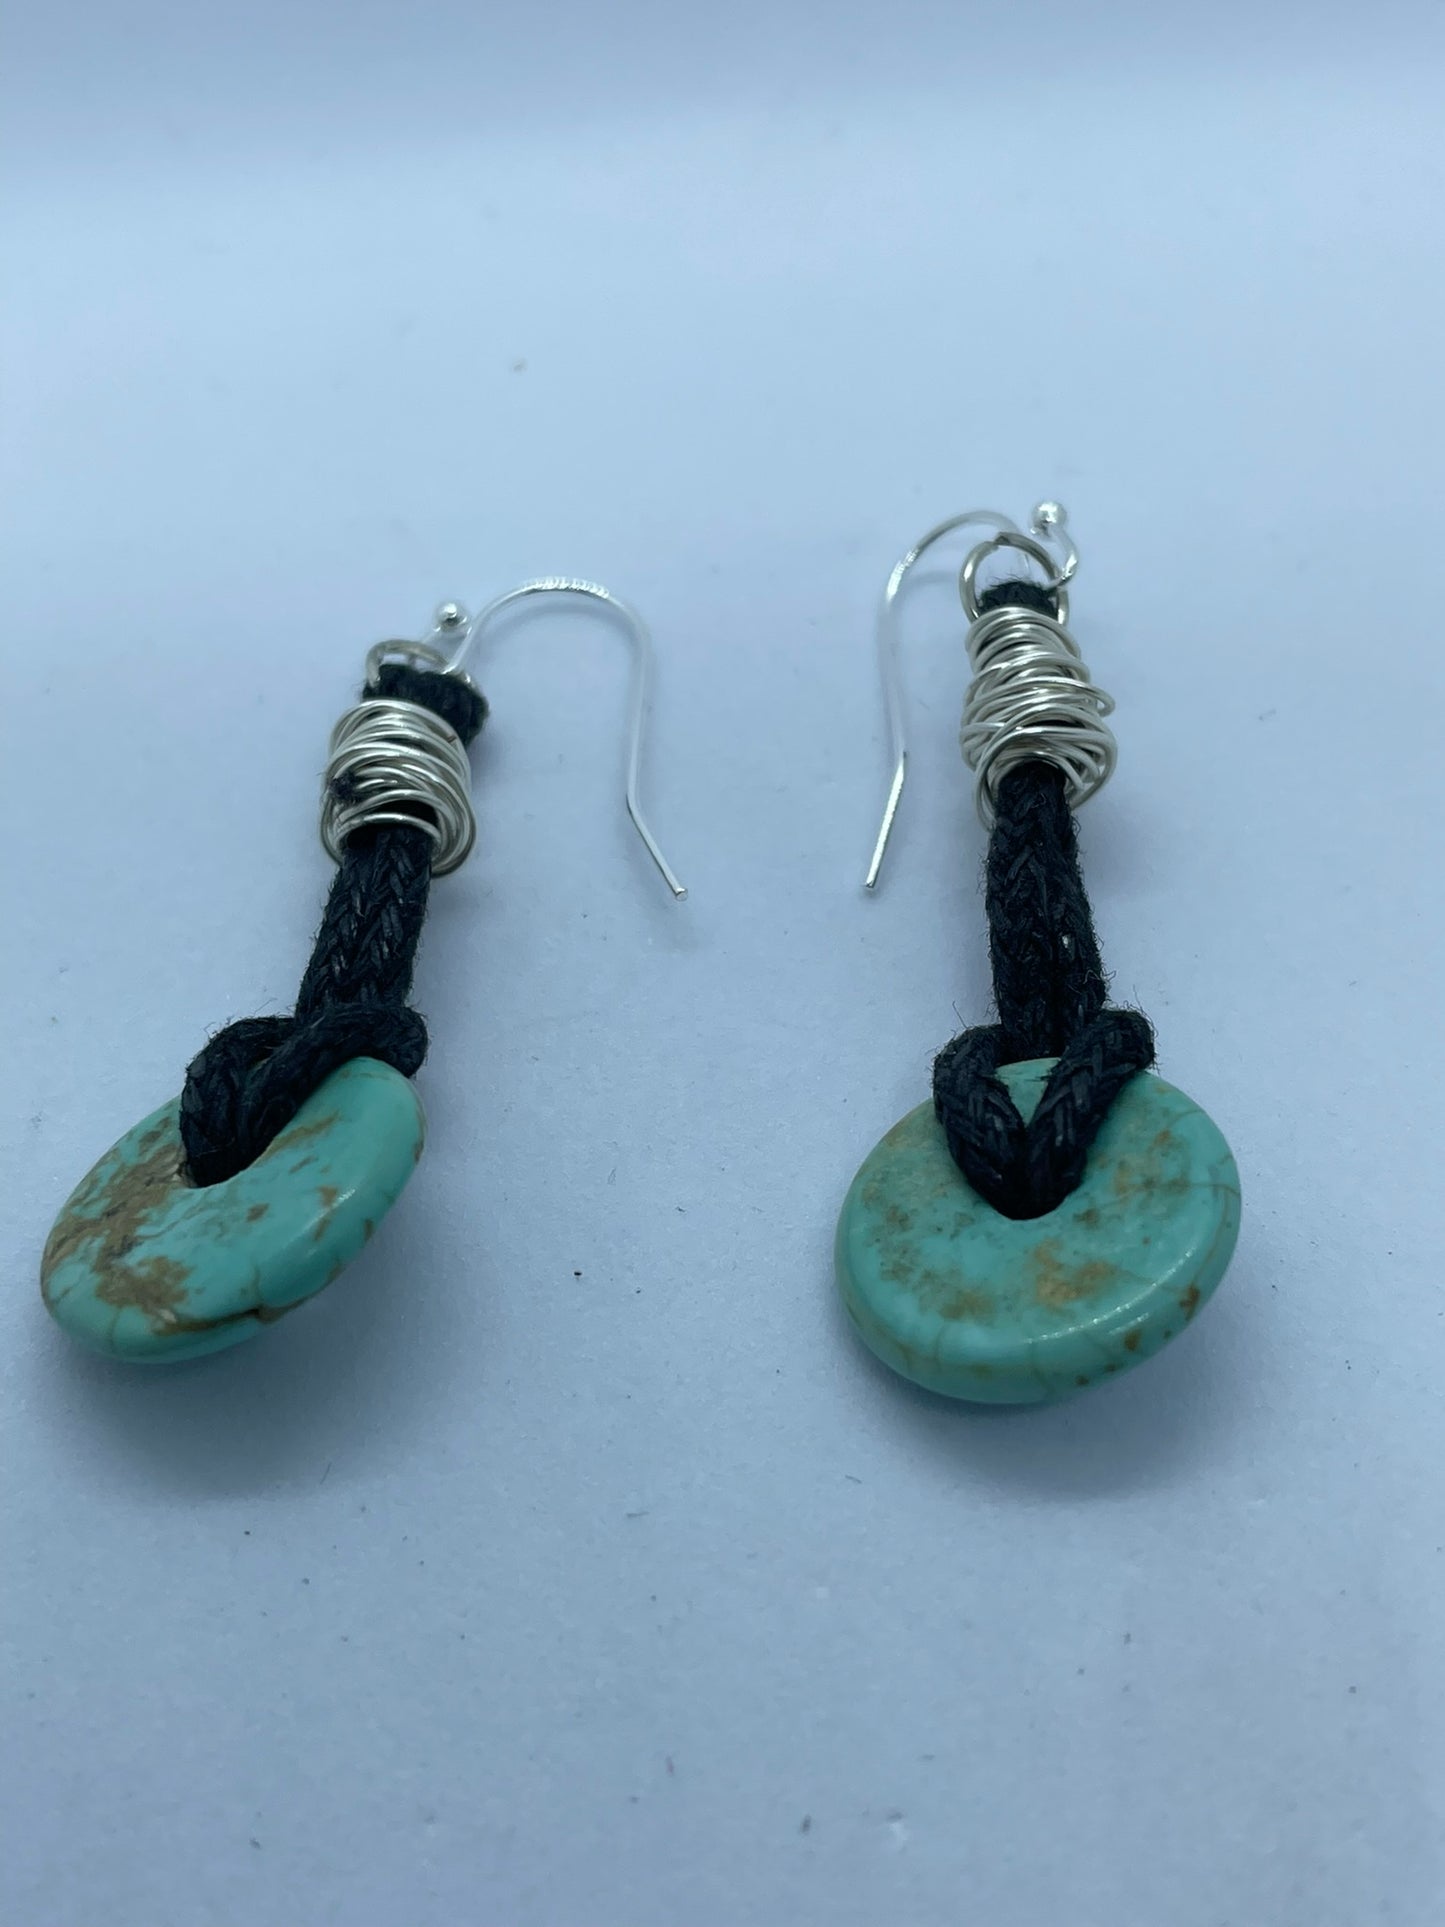 Black leather thong earrings with turquoise bead